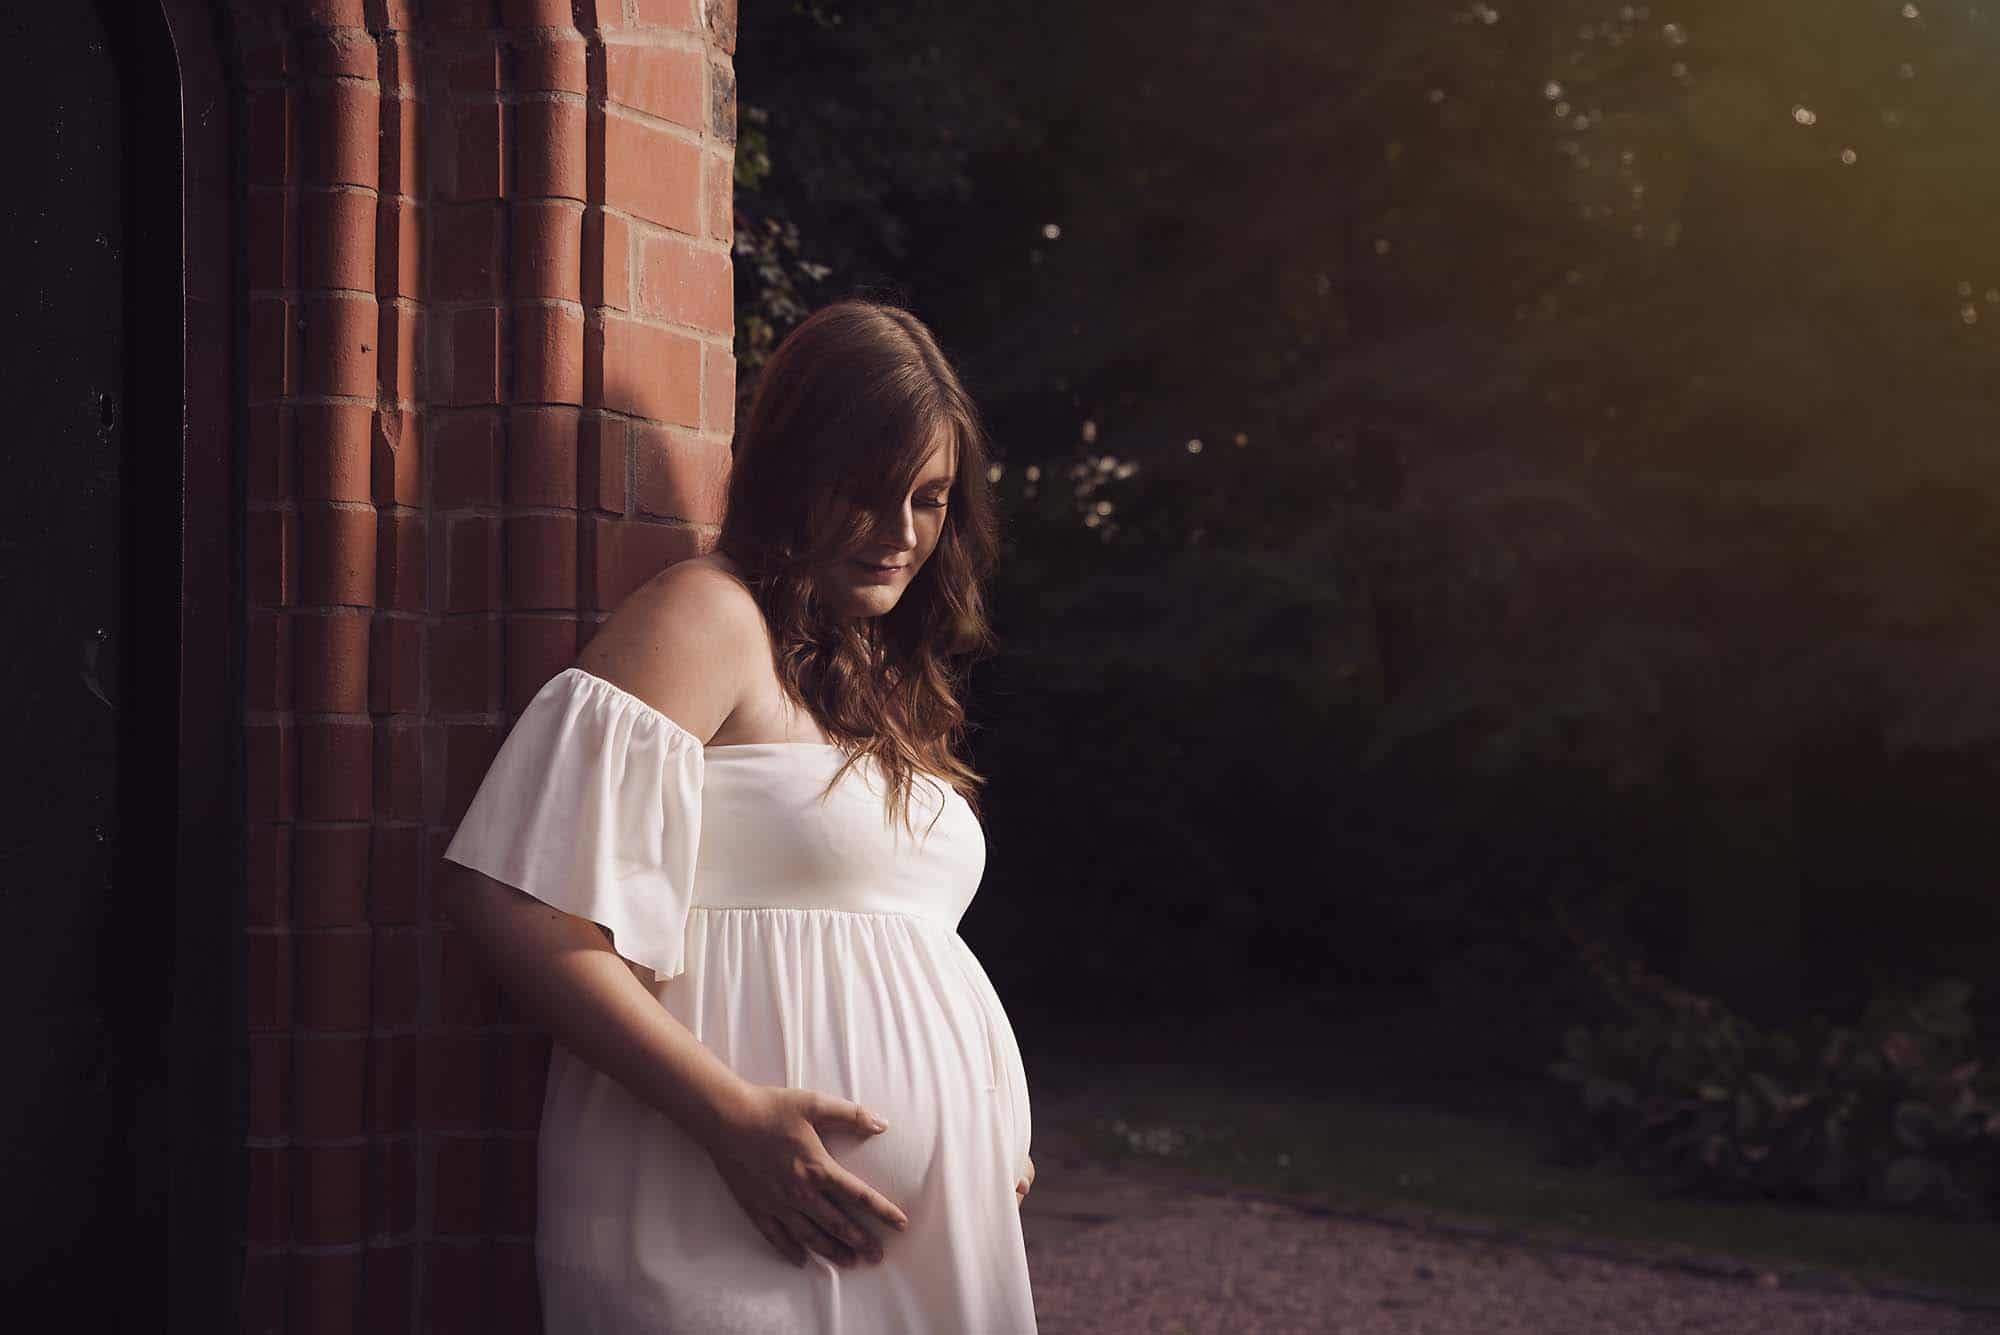 Outdoor maternity photo shoot in a park photographed by Maternity Photographer Manchester